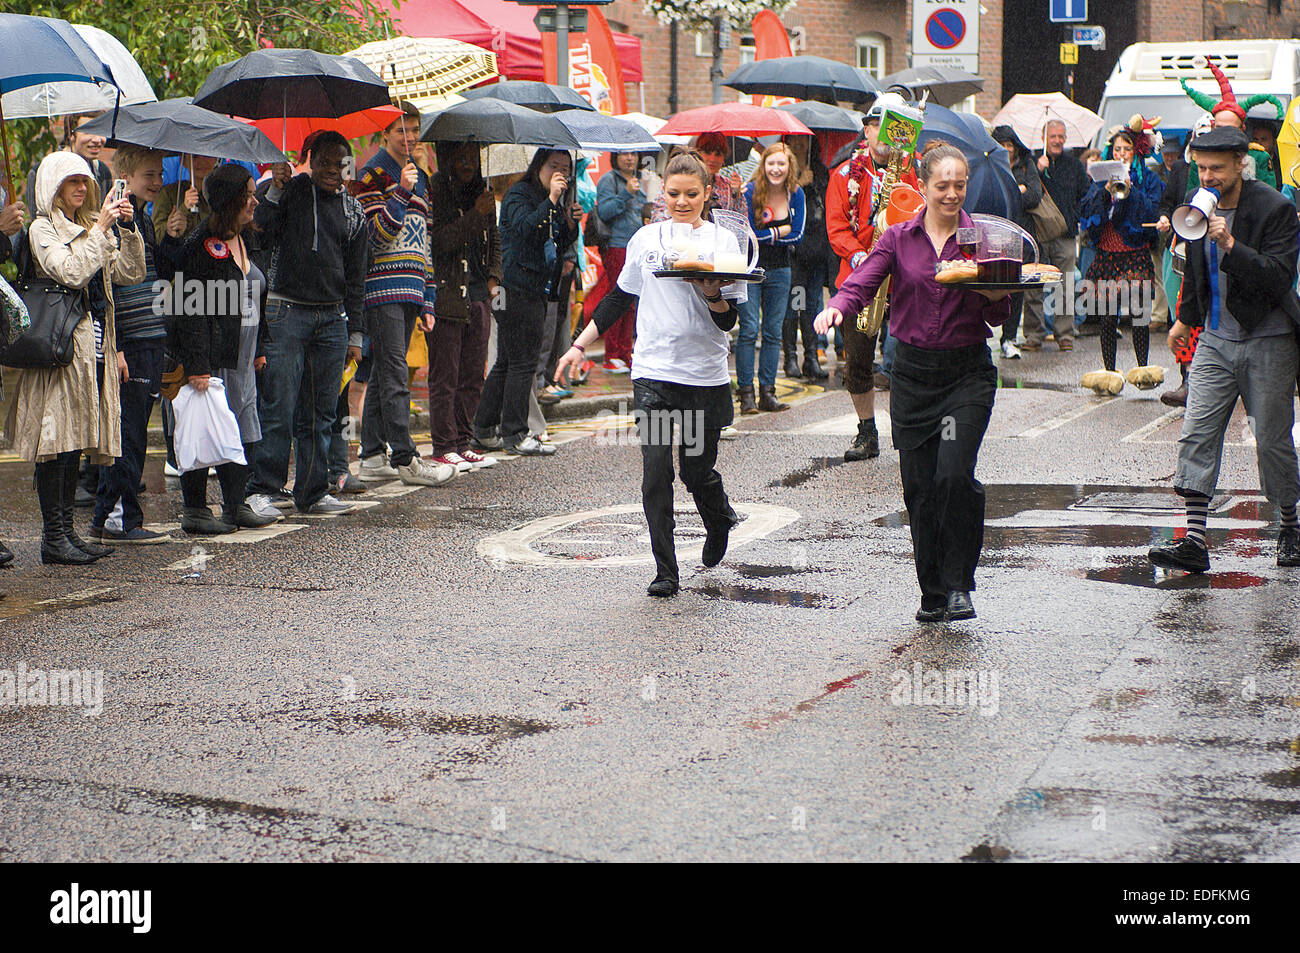 A couple of waitresses race against each other at the annual Waiters' Race on Bastille Day near Borough Market. Stock Photo